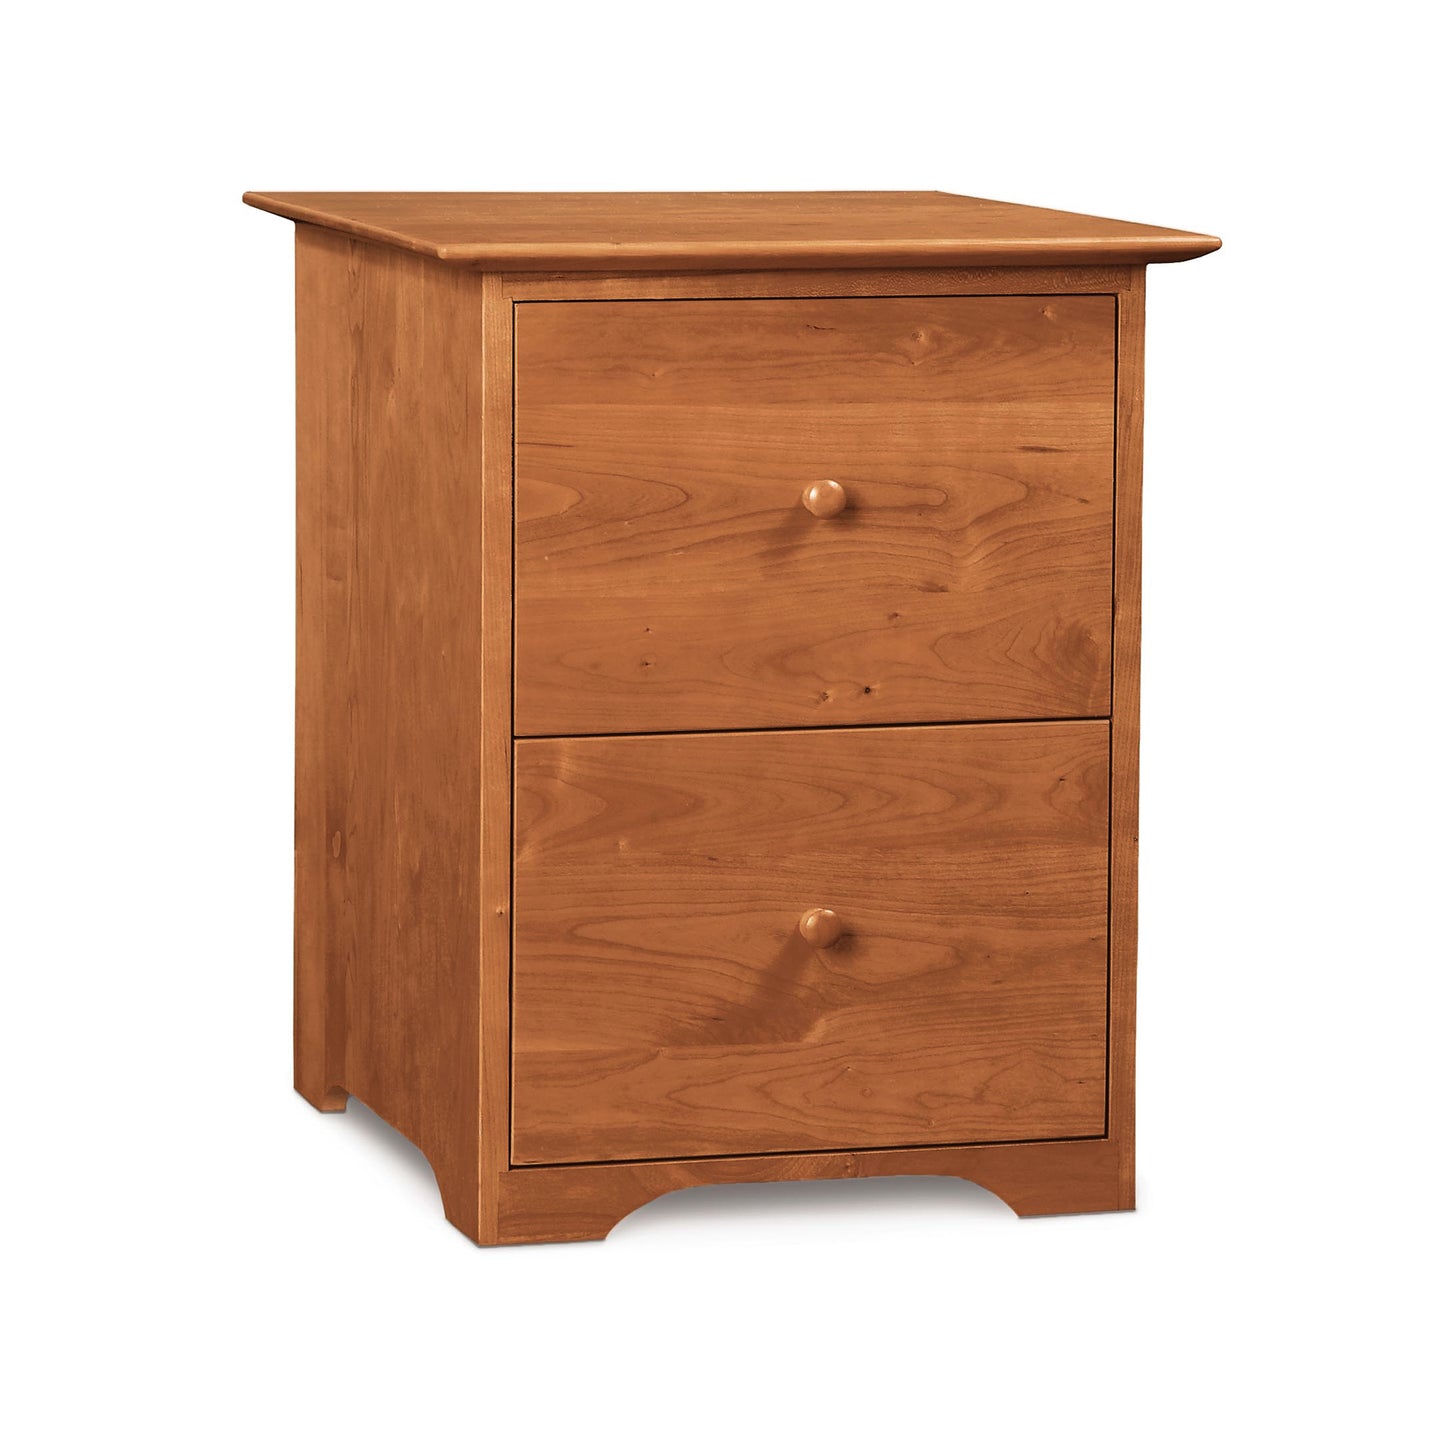 Copeland Furniture's Sarah Rolling Filing Cabinet two-drawer nightstand isolated on a white background.